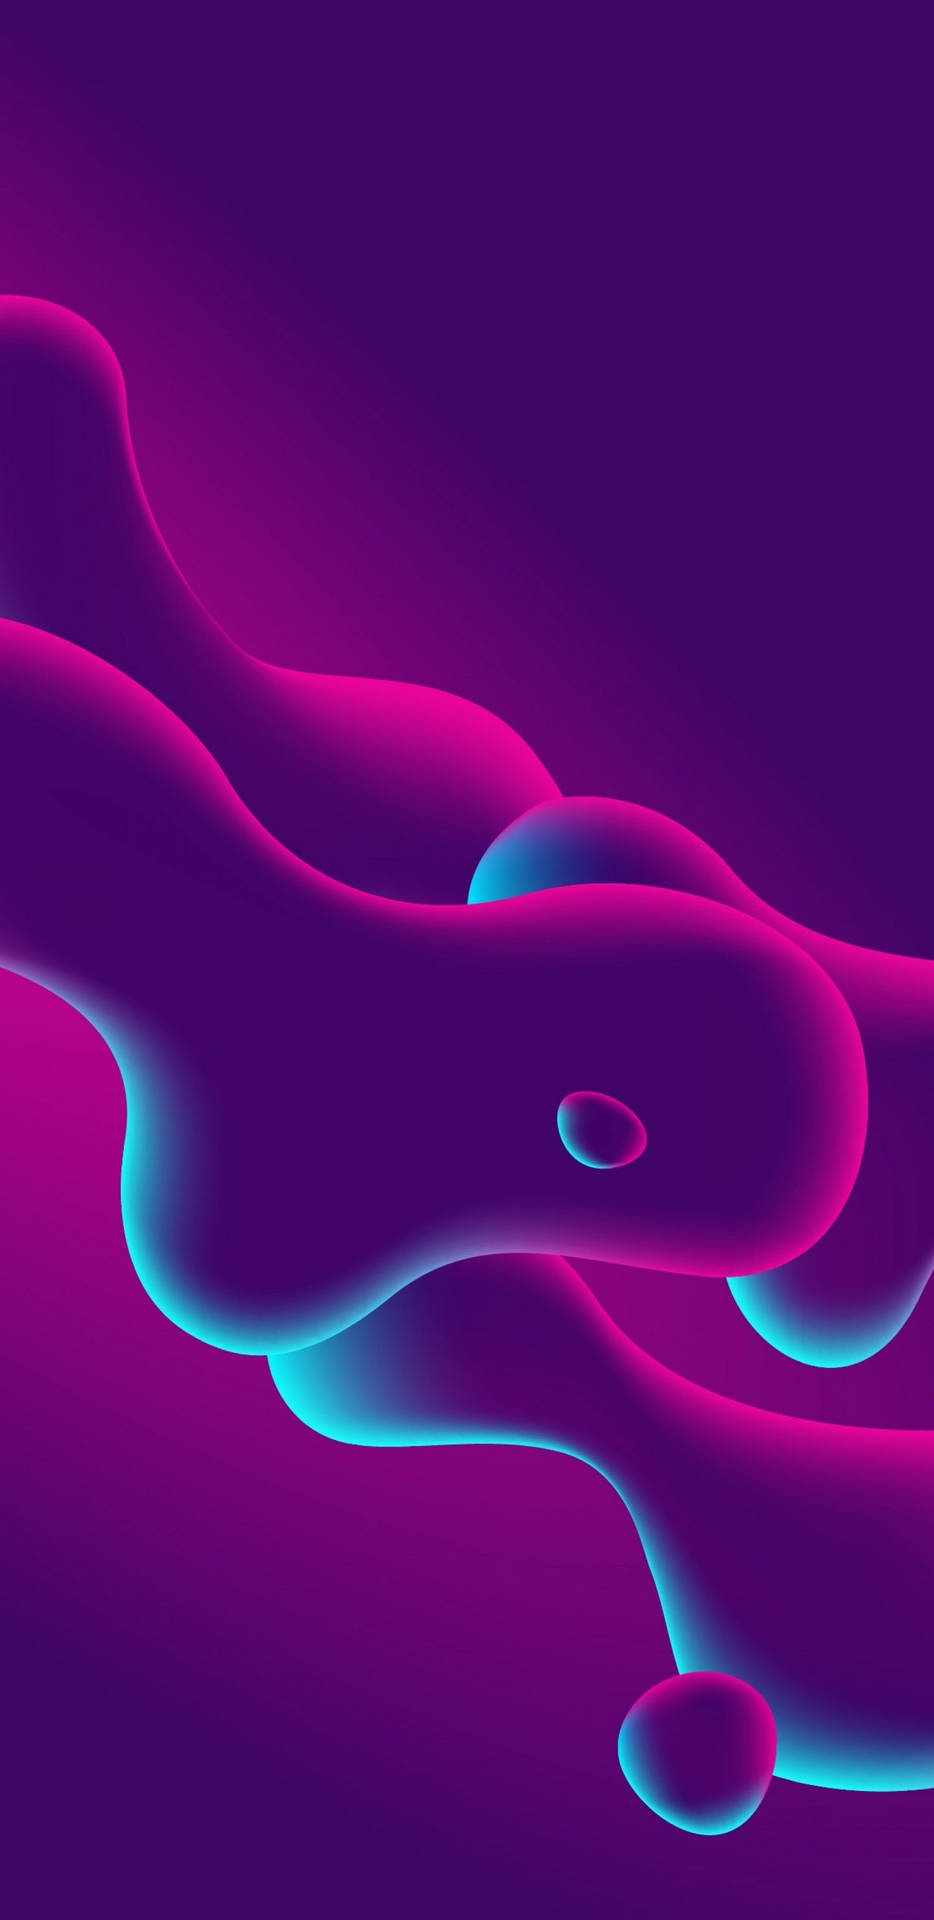 Pink Iphone Xr Aesthetic Purple And Blue Wallpaper